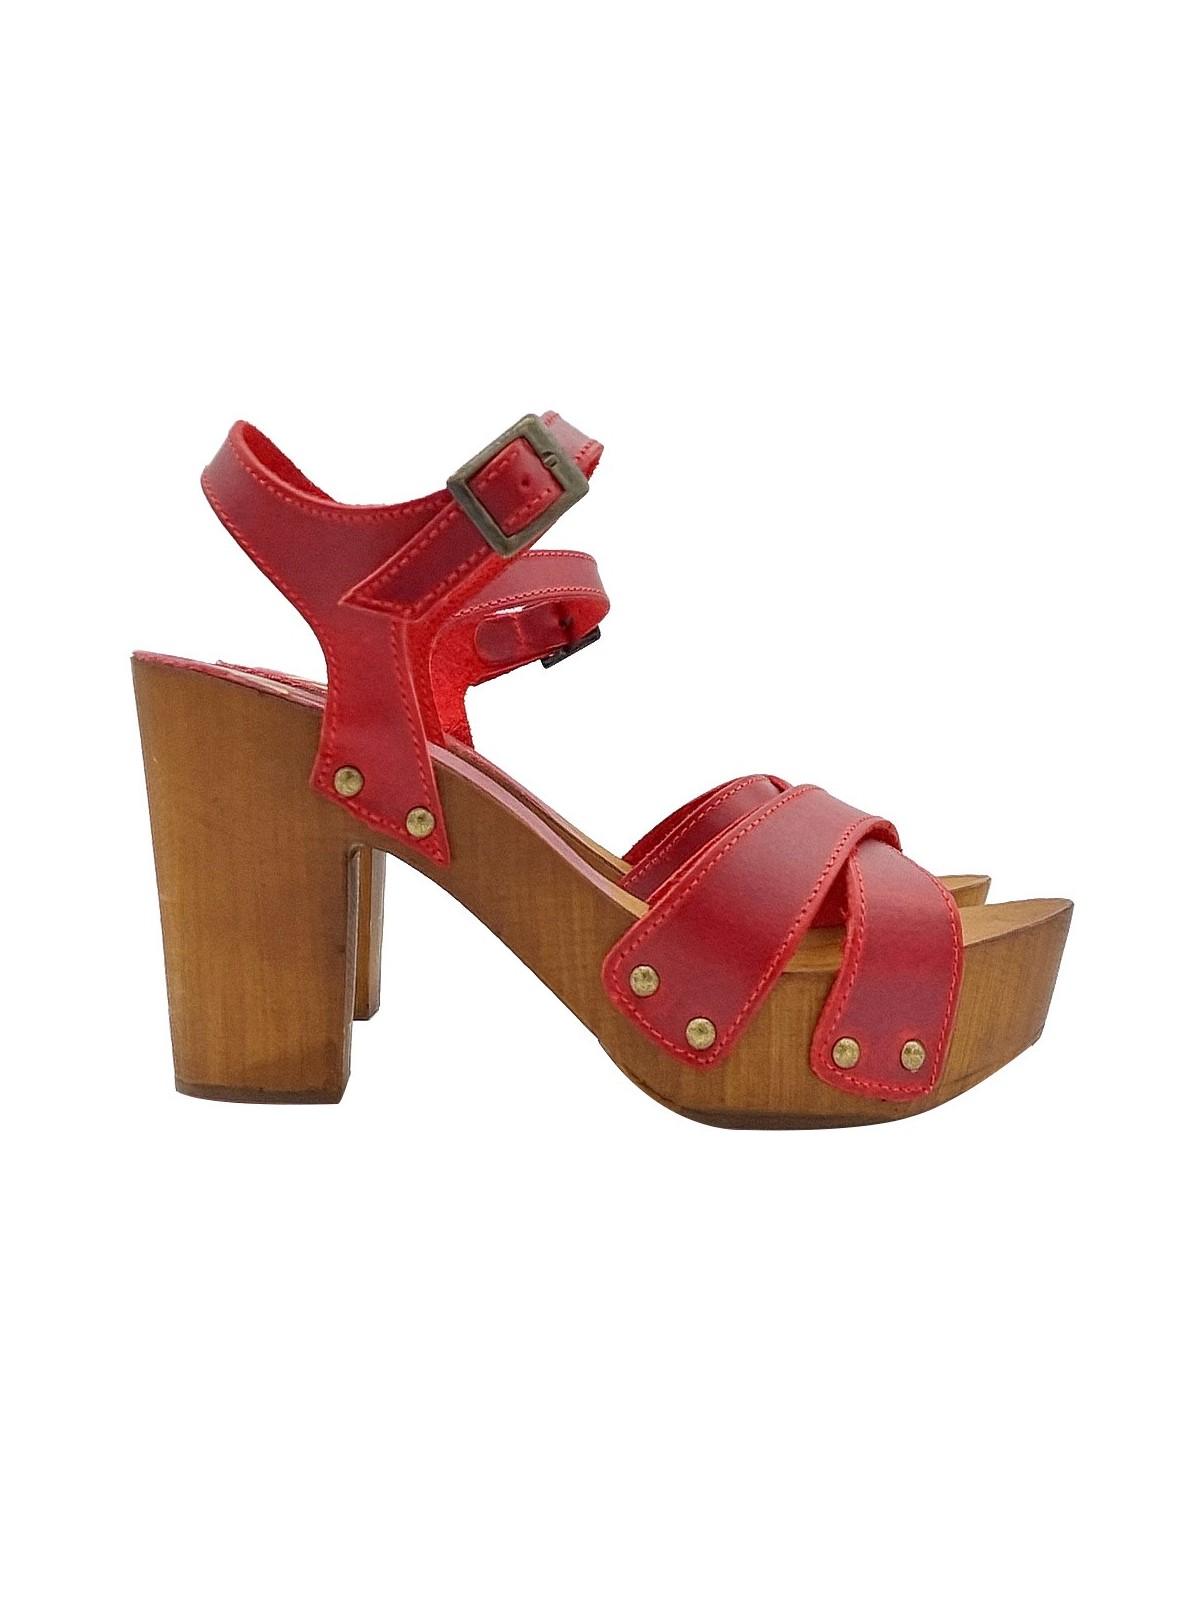 RED SANDALS WITH CROSSED BANDS AND STRAP